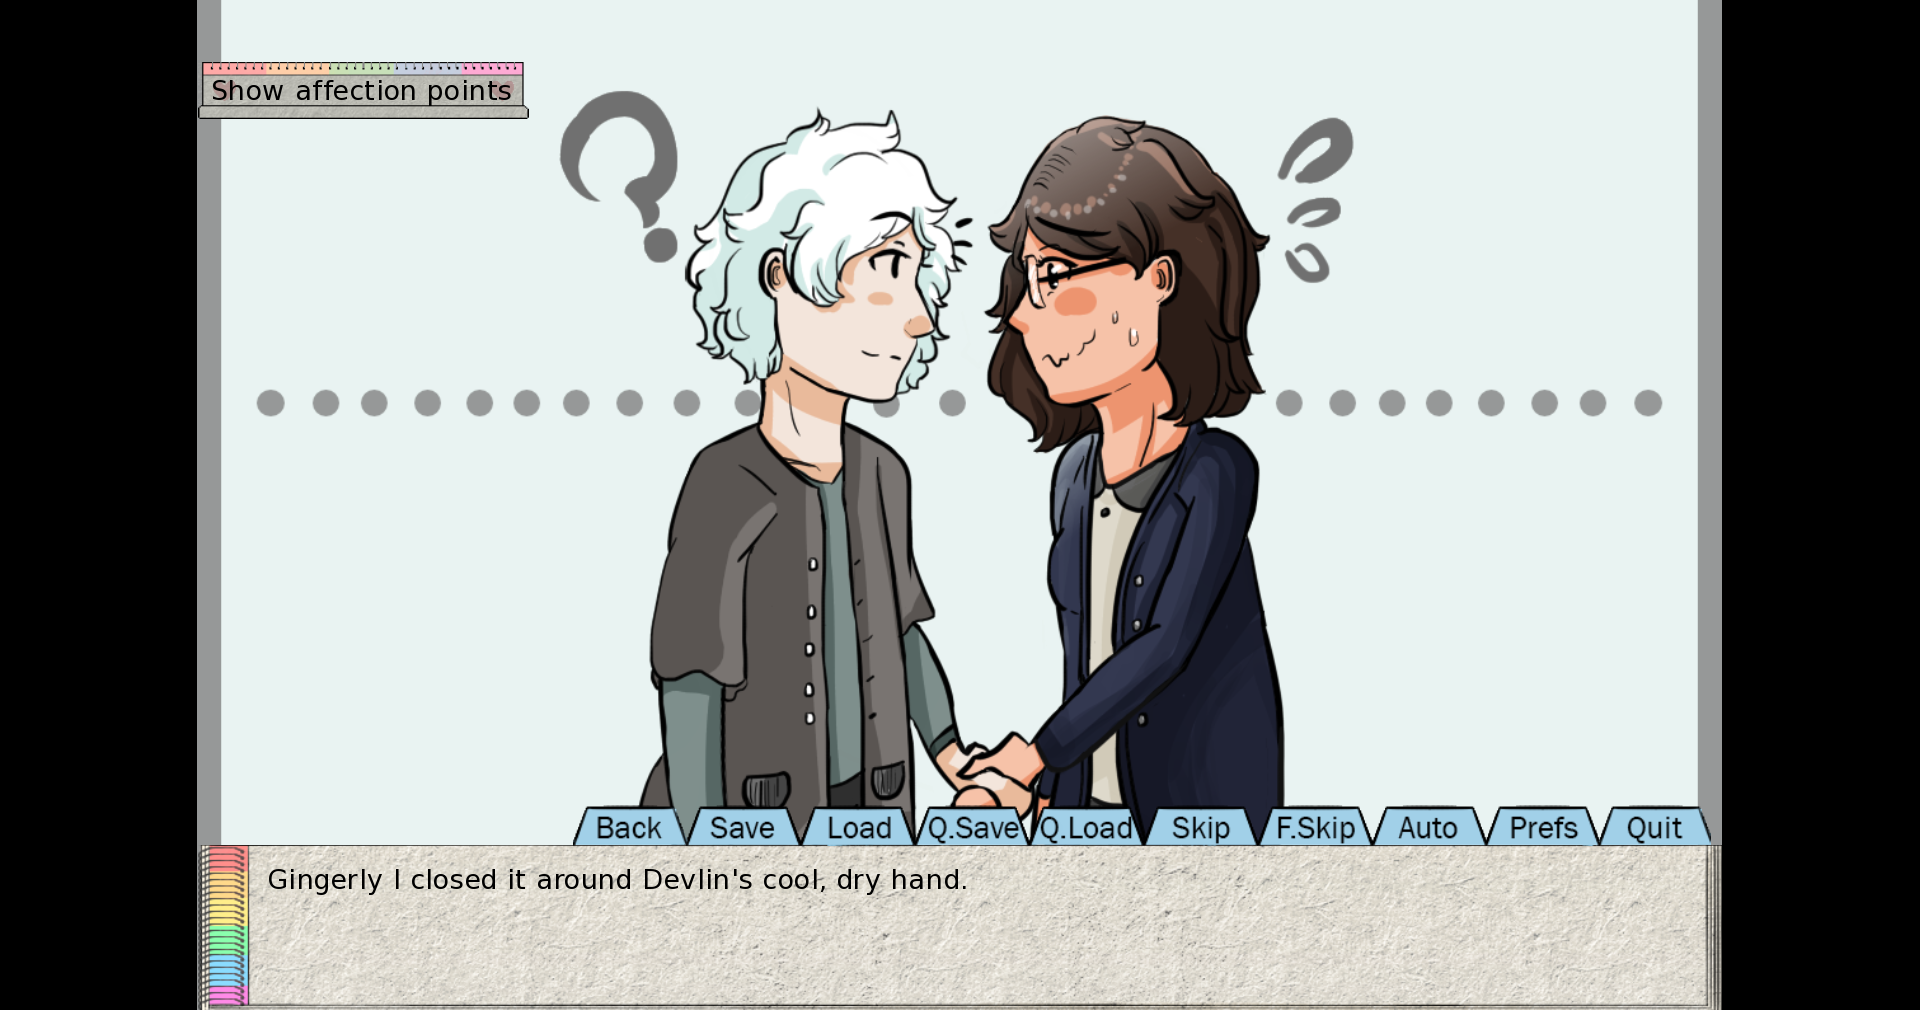 A chibi illustration of the player character shaking Devlin's hand